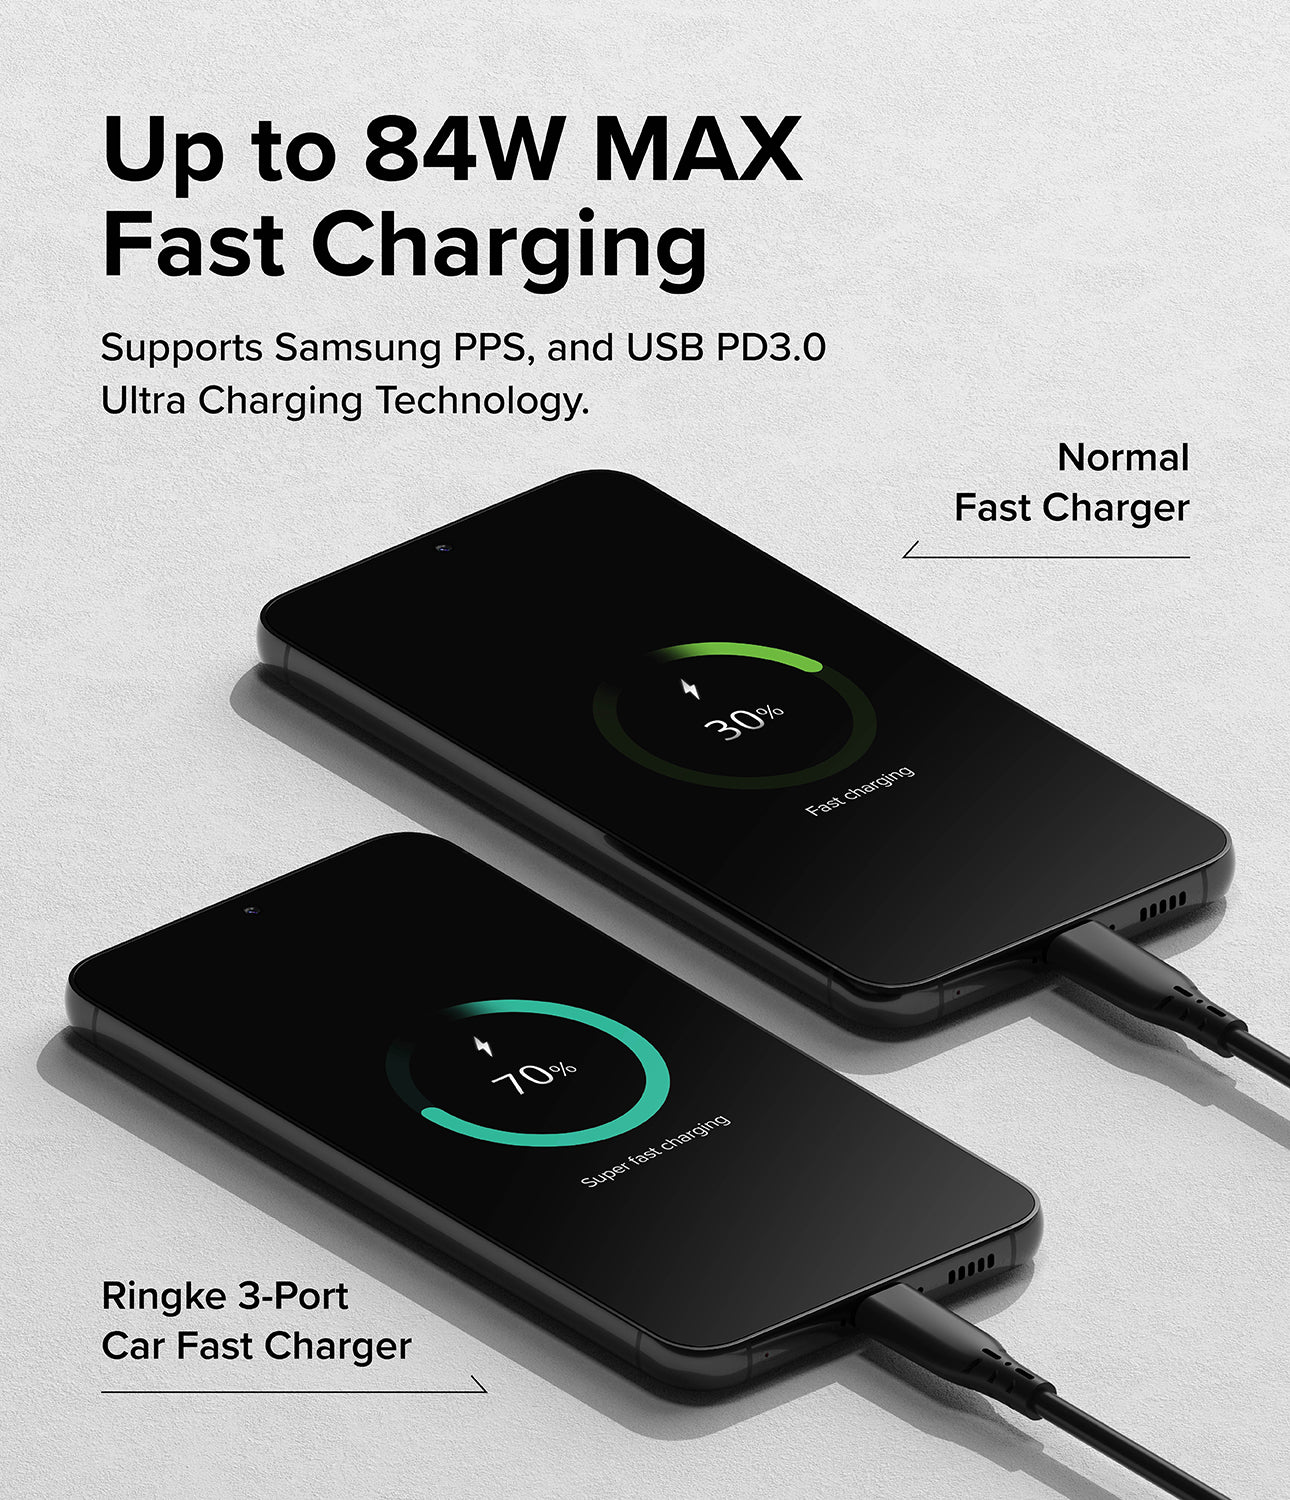 Ringke 3-Port Car Fast Charger - Up to 84W MAX Fast Charging. Supports Samsung PPS, and USB PD3.0. Ultra Charging Technology.